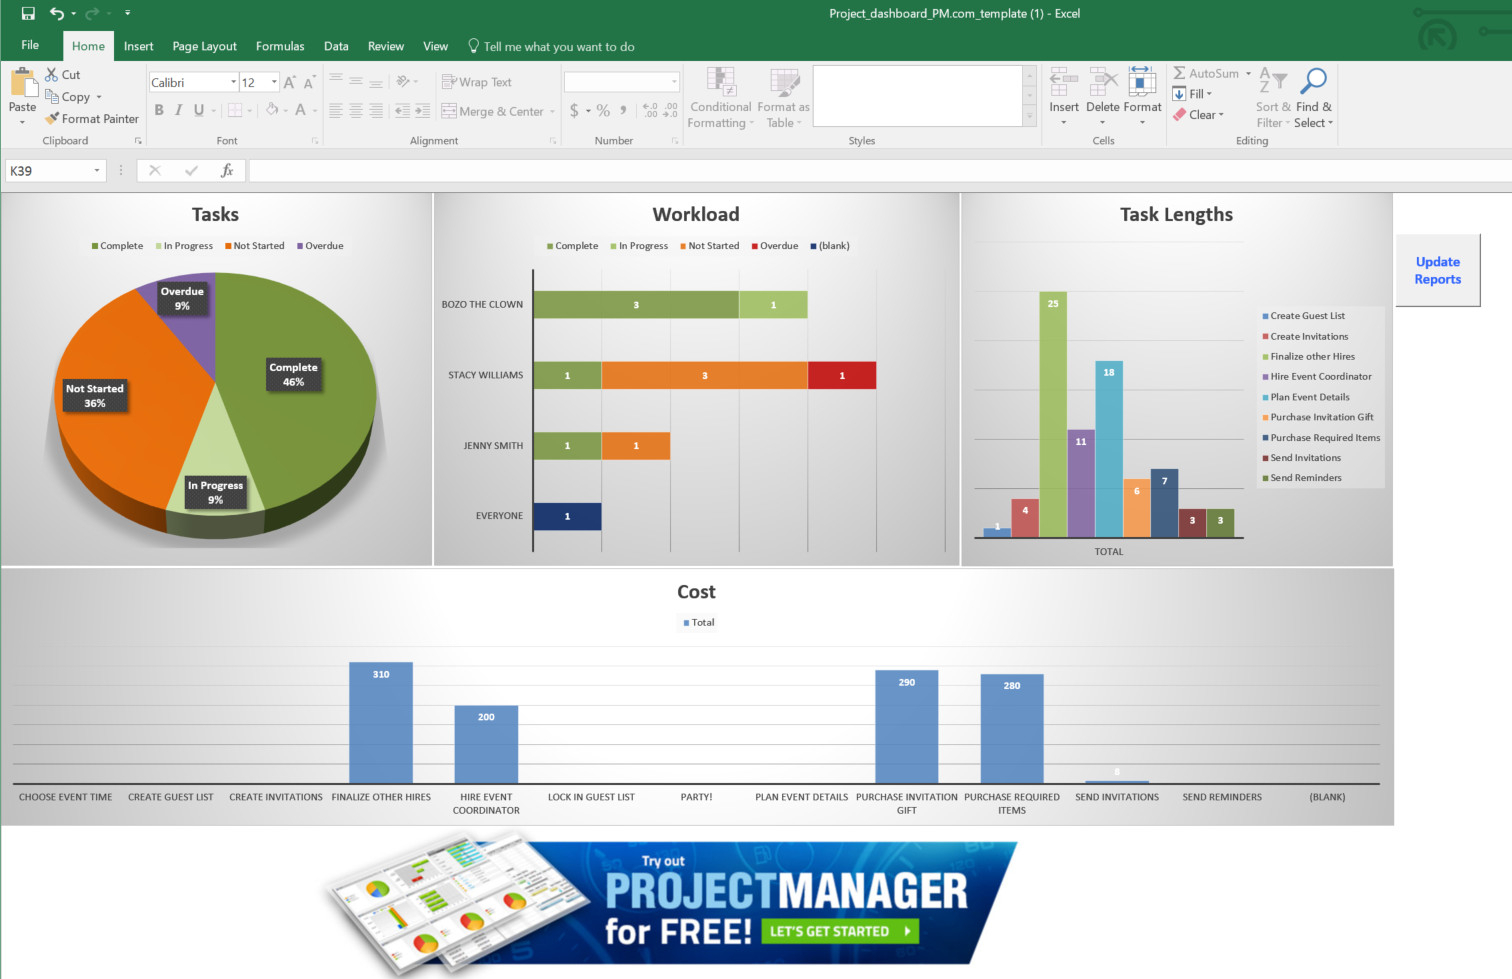 Task Management Spreadsheet Excel Throughout Guide To Excel Project Management  Projectmanager